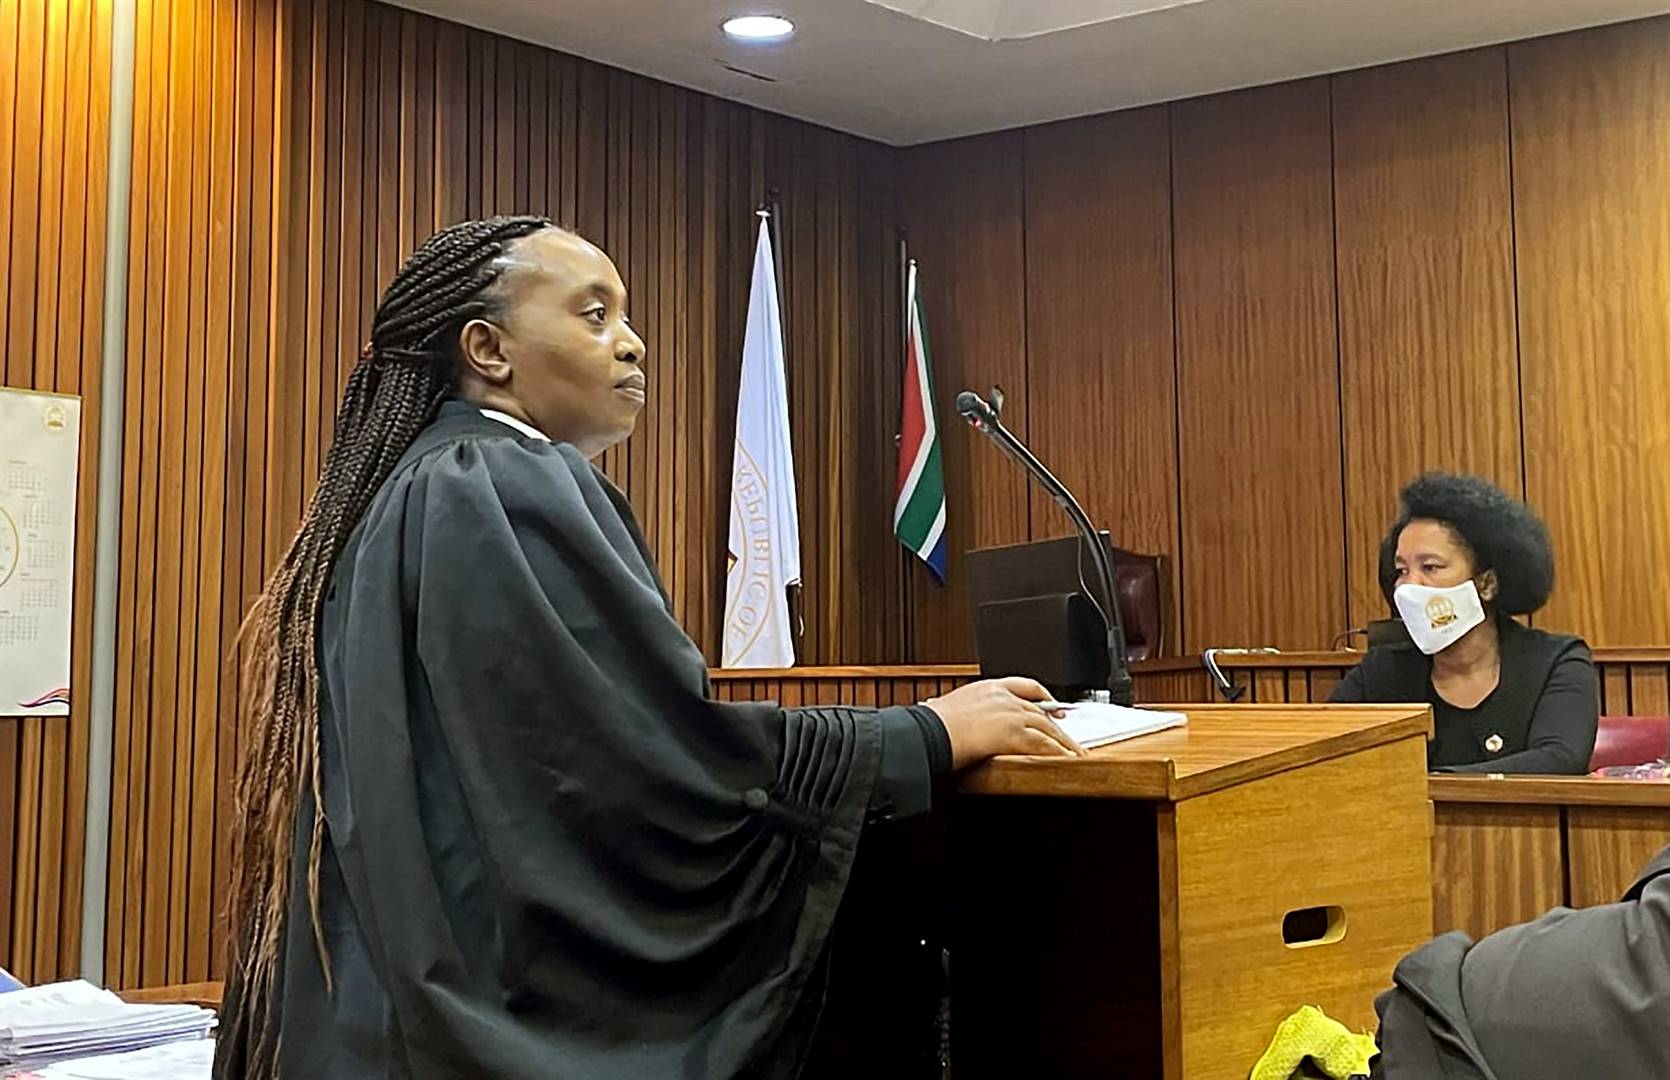 Advocate Zandile Mshololo continued with her cross examination of forensic expert Sergeant Thabo Mosia. Photo: Kgomotso Medupe